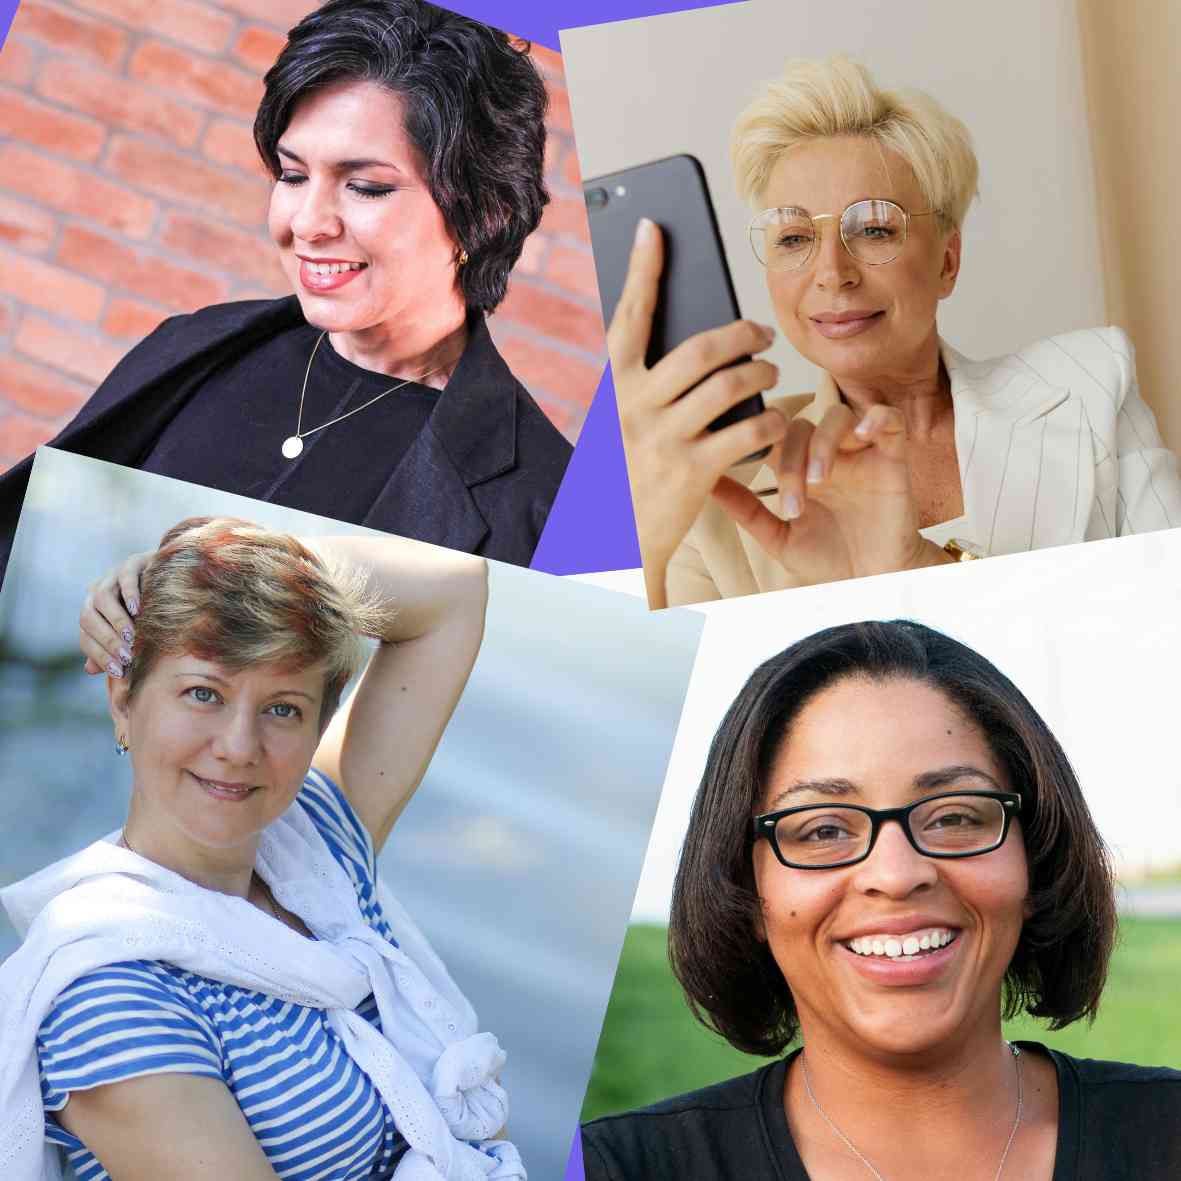 Sure! Here's an SEO-friendly alt text for the title "Short Haircuts for Mature Women": "Short haircuts for mature women, chic and age-appropriate hairstyles for older women"